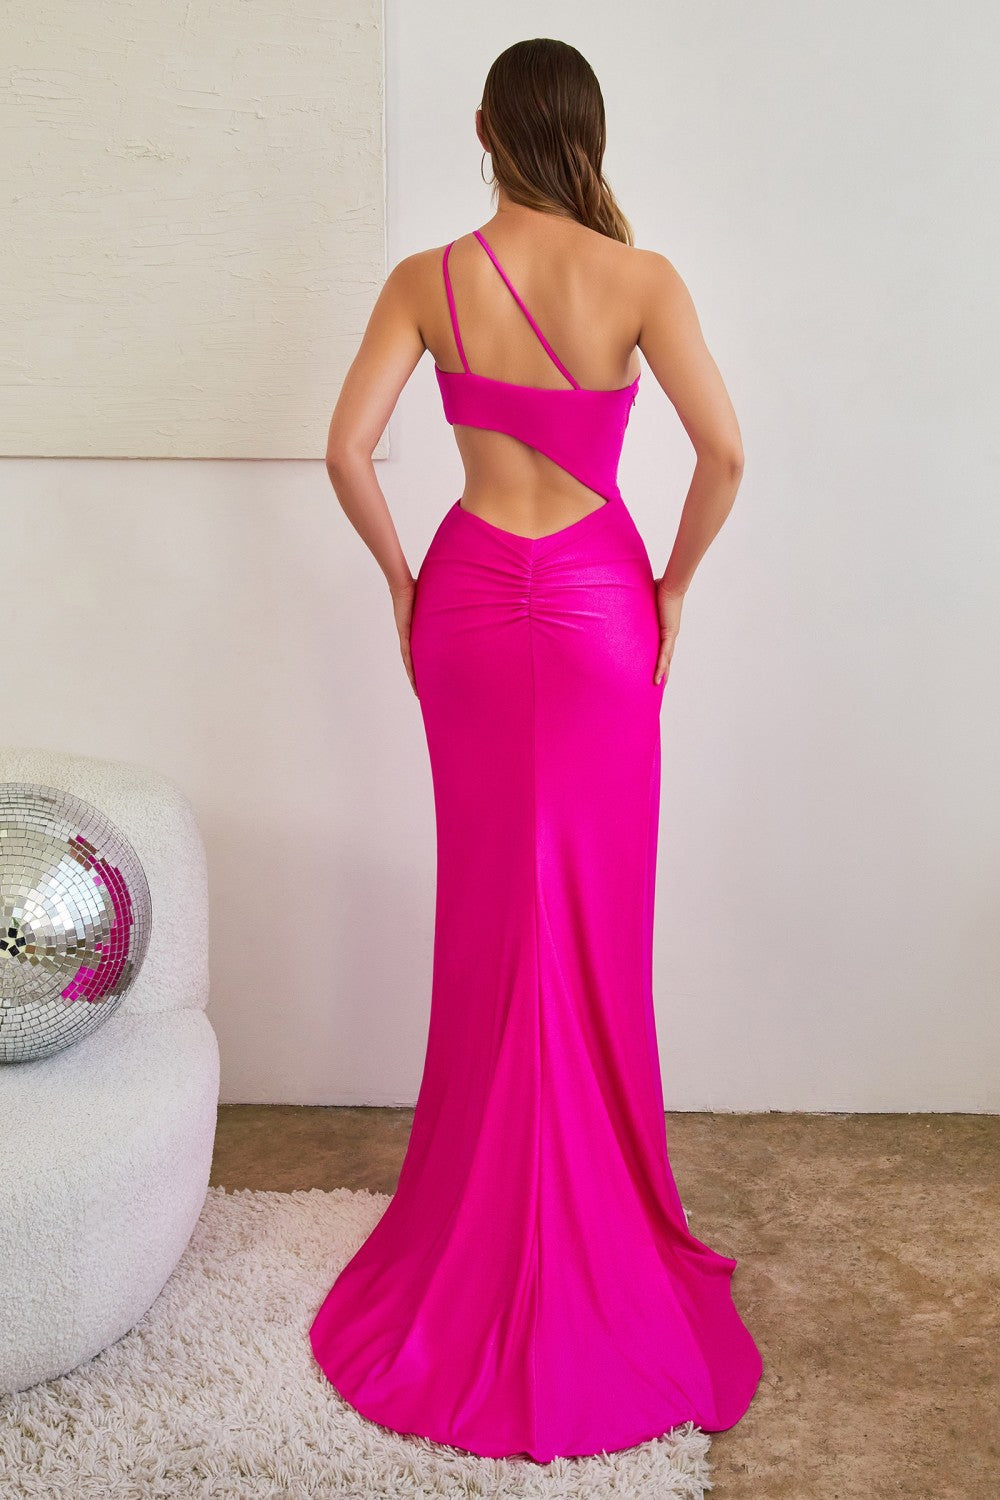 Fuchsia Sexy Fitted Cut Out Slit Gown CD887 - Women Evening Formal Gown - Special Occasion